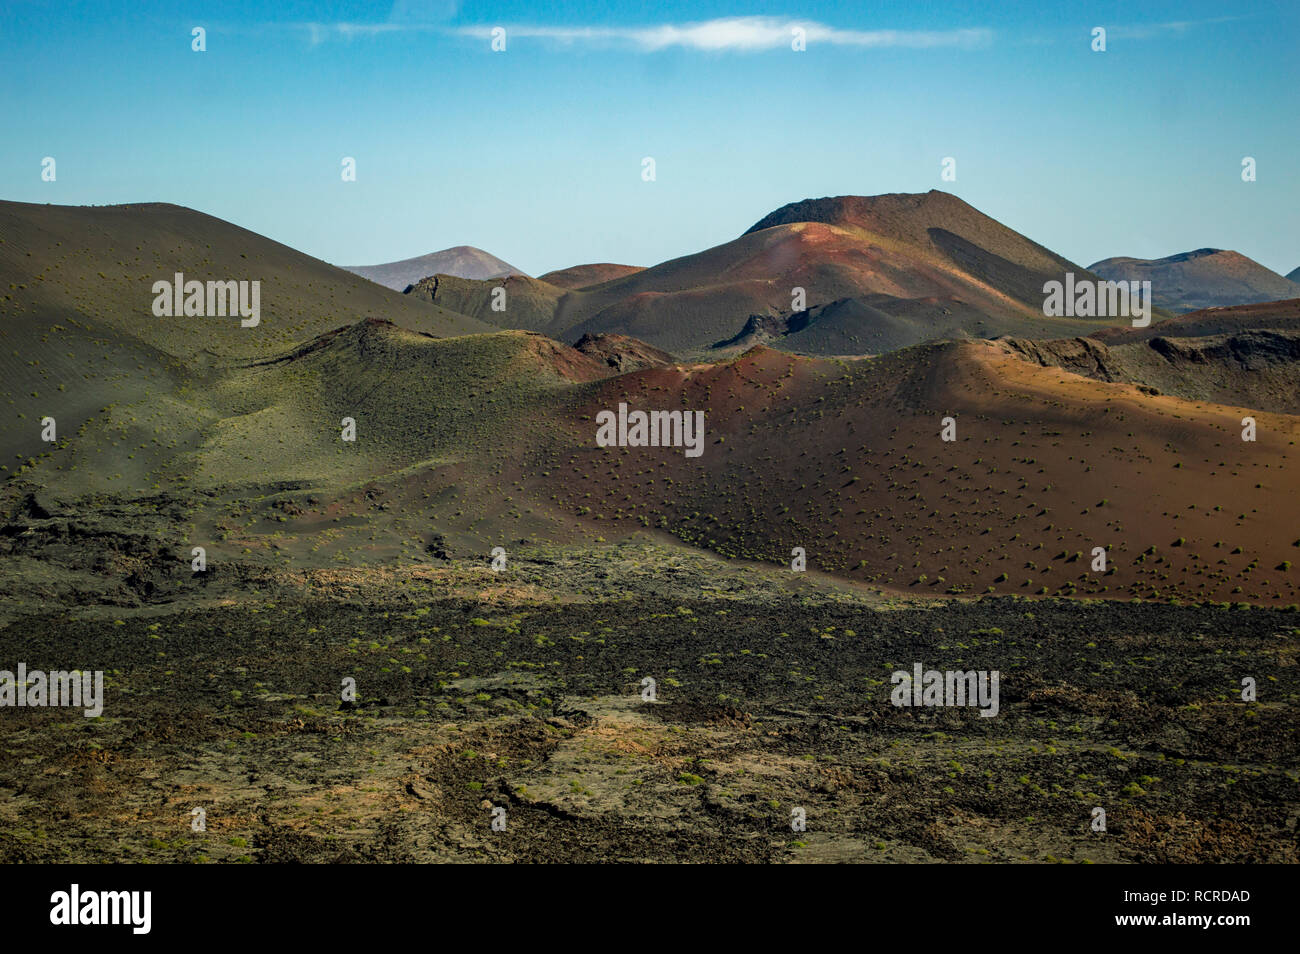 The volcanoes of Timanfaya National Park in Lanzarote, Canary Islands Stock Photo